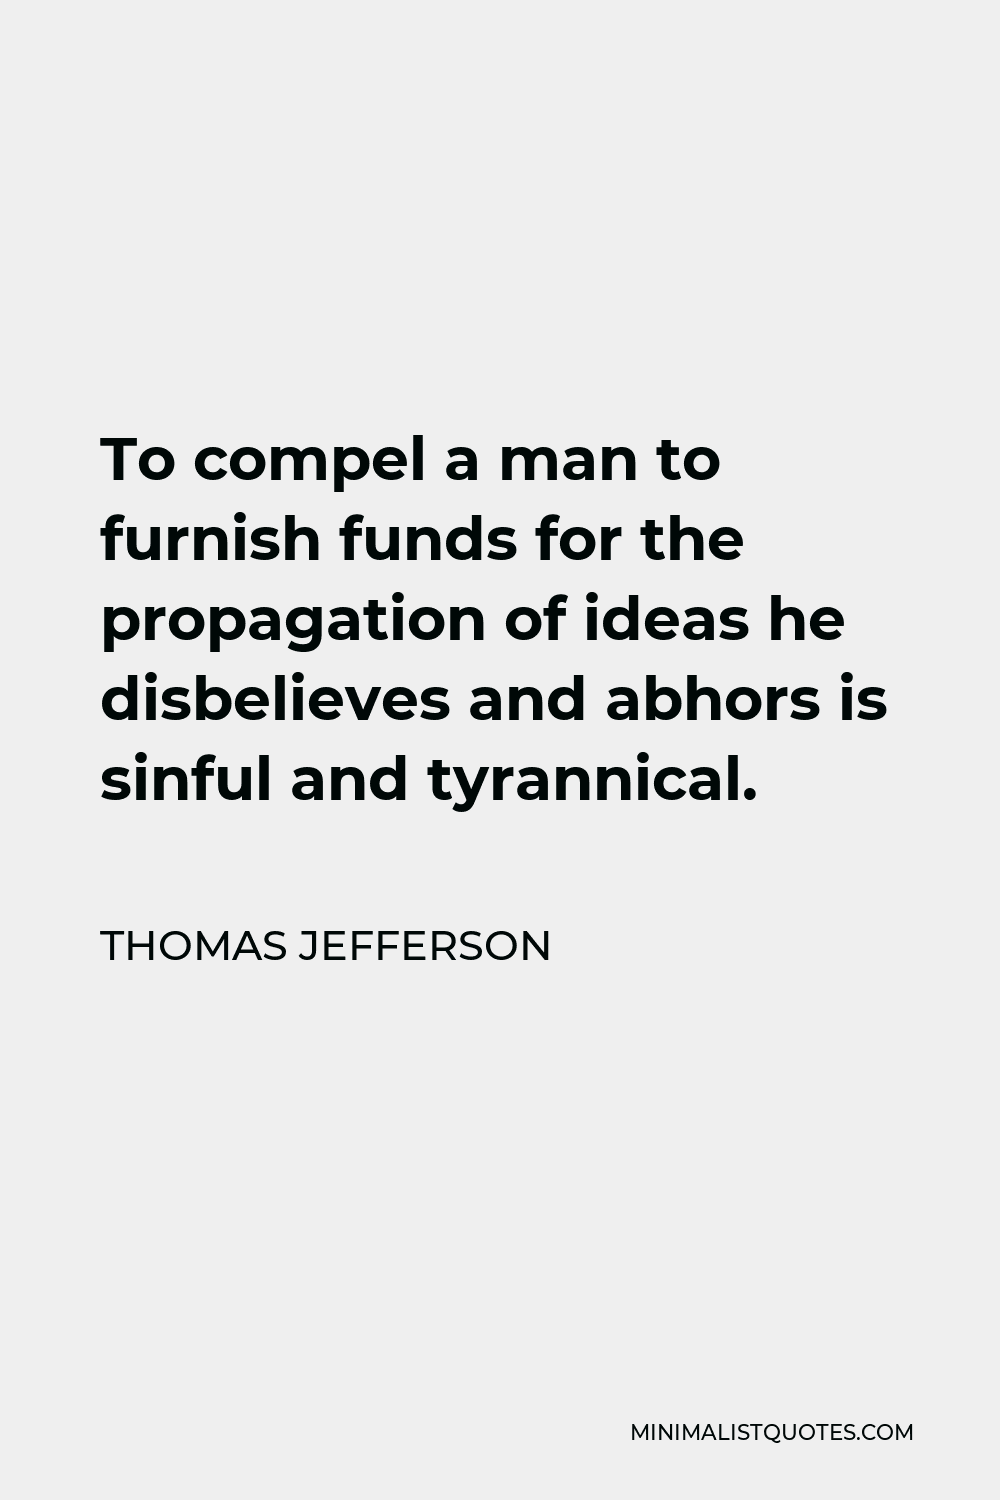 Thomas Jefferson Quote - To compel a man to furnish funds for the propagation of ideas he disbelieves and abhors is sinful and tyrannical.